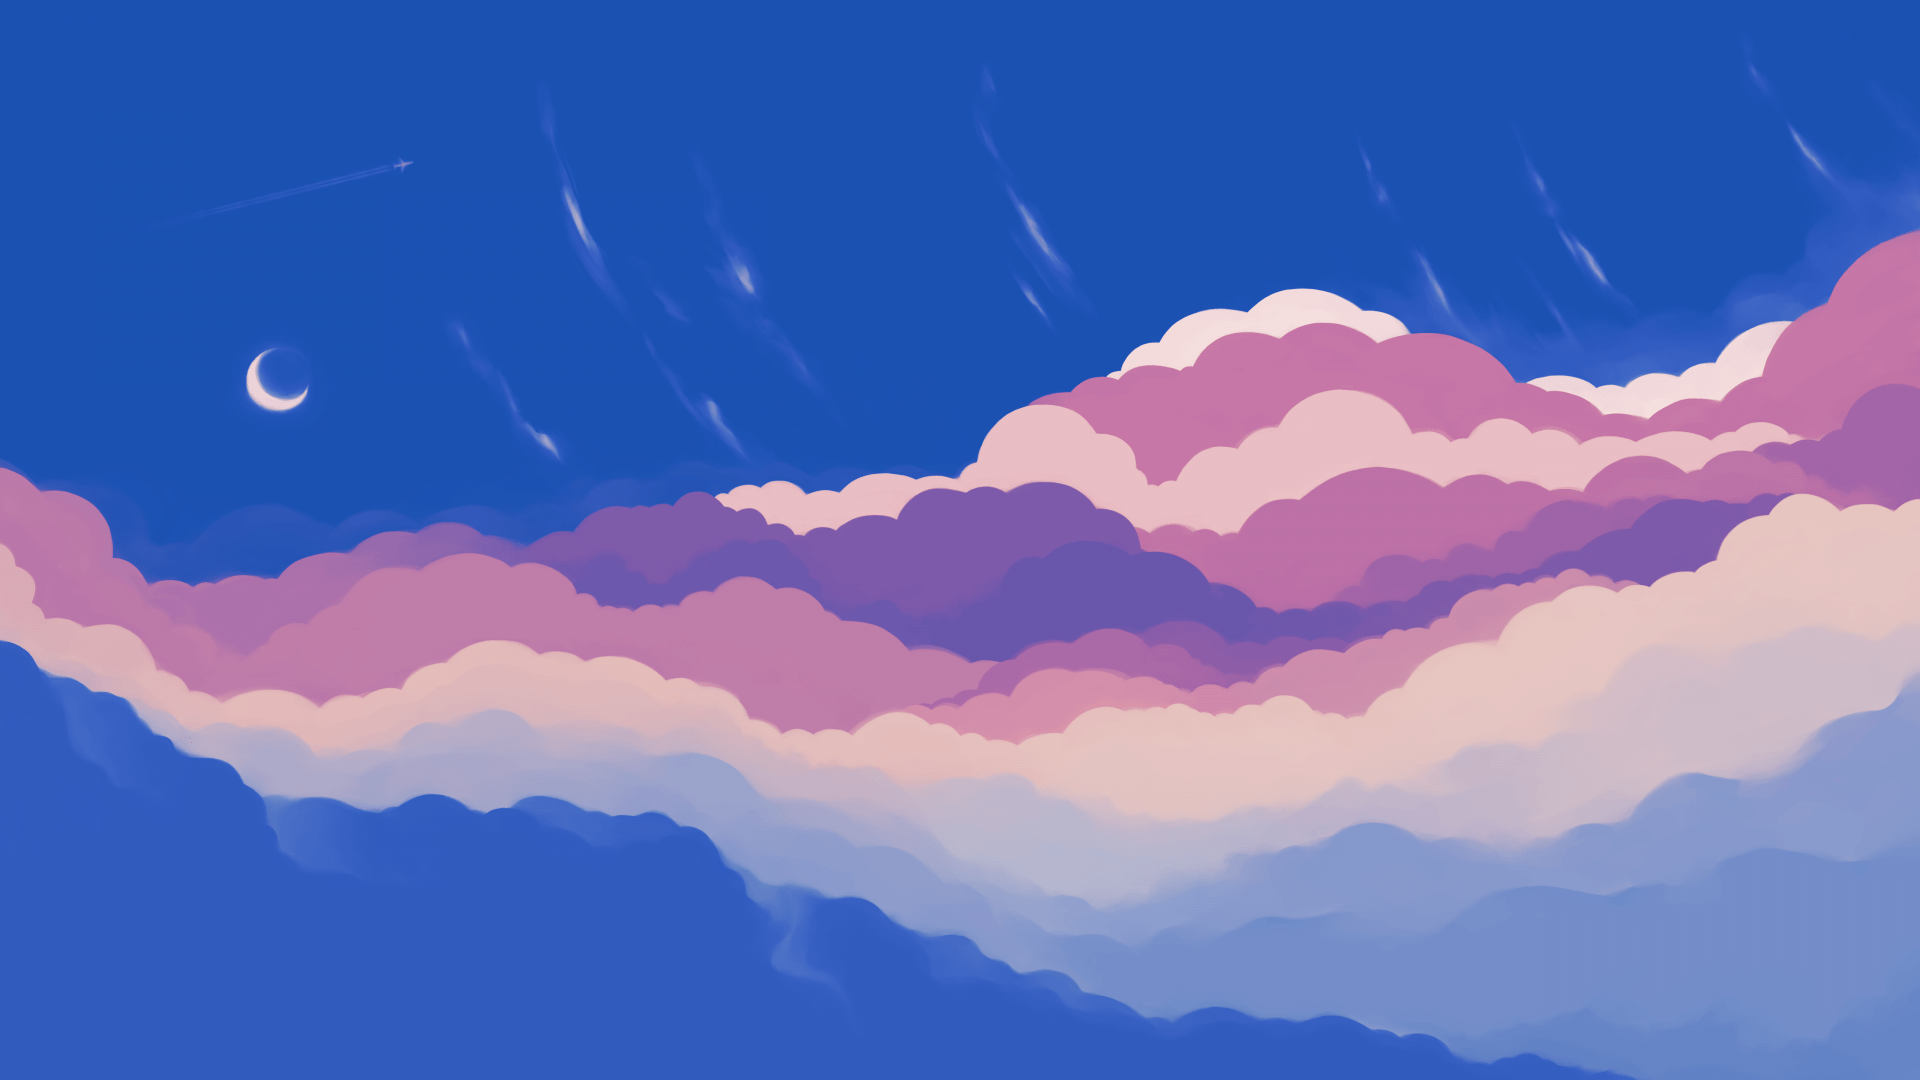 A digital painting of a starry night sky with pink and blue clouds - 1920x1080, sky